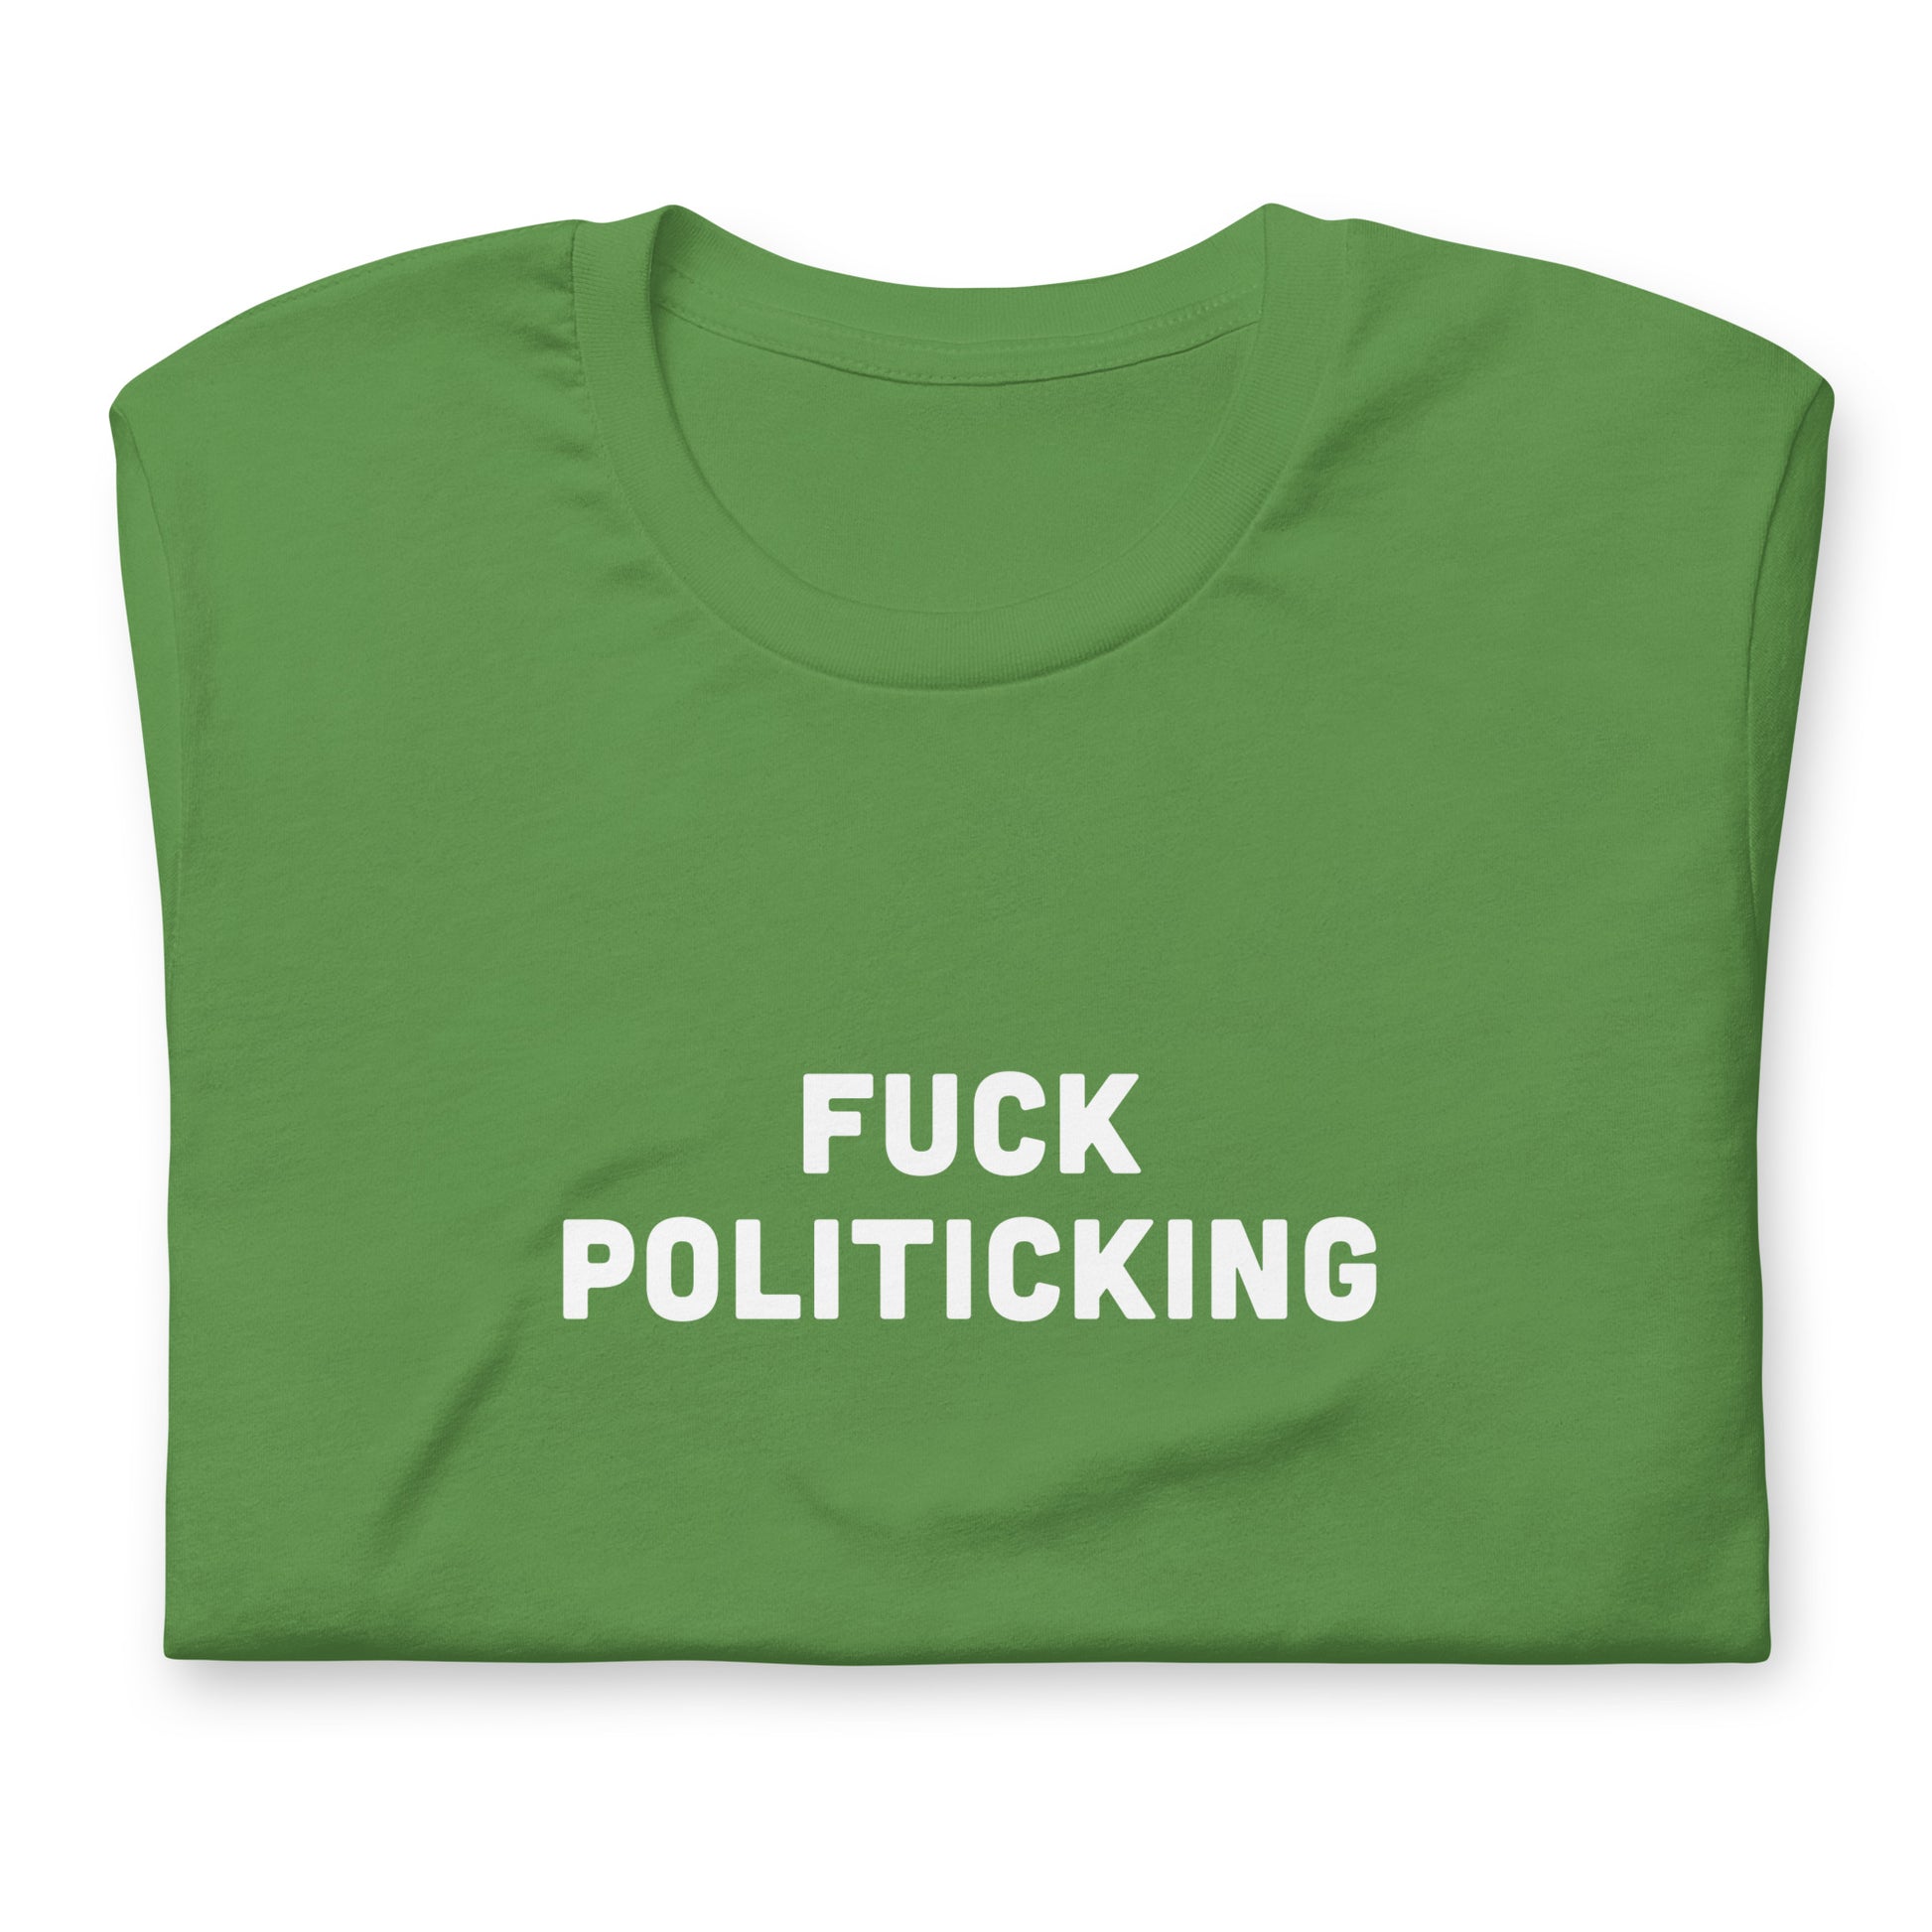 Fuck Politicking T-Shirt Size 2XL Color Navy